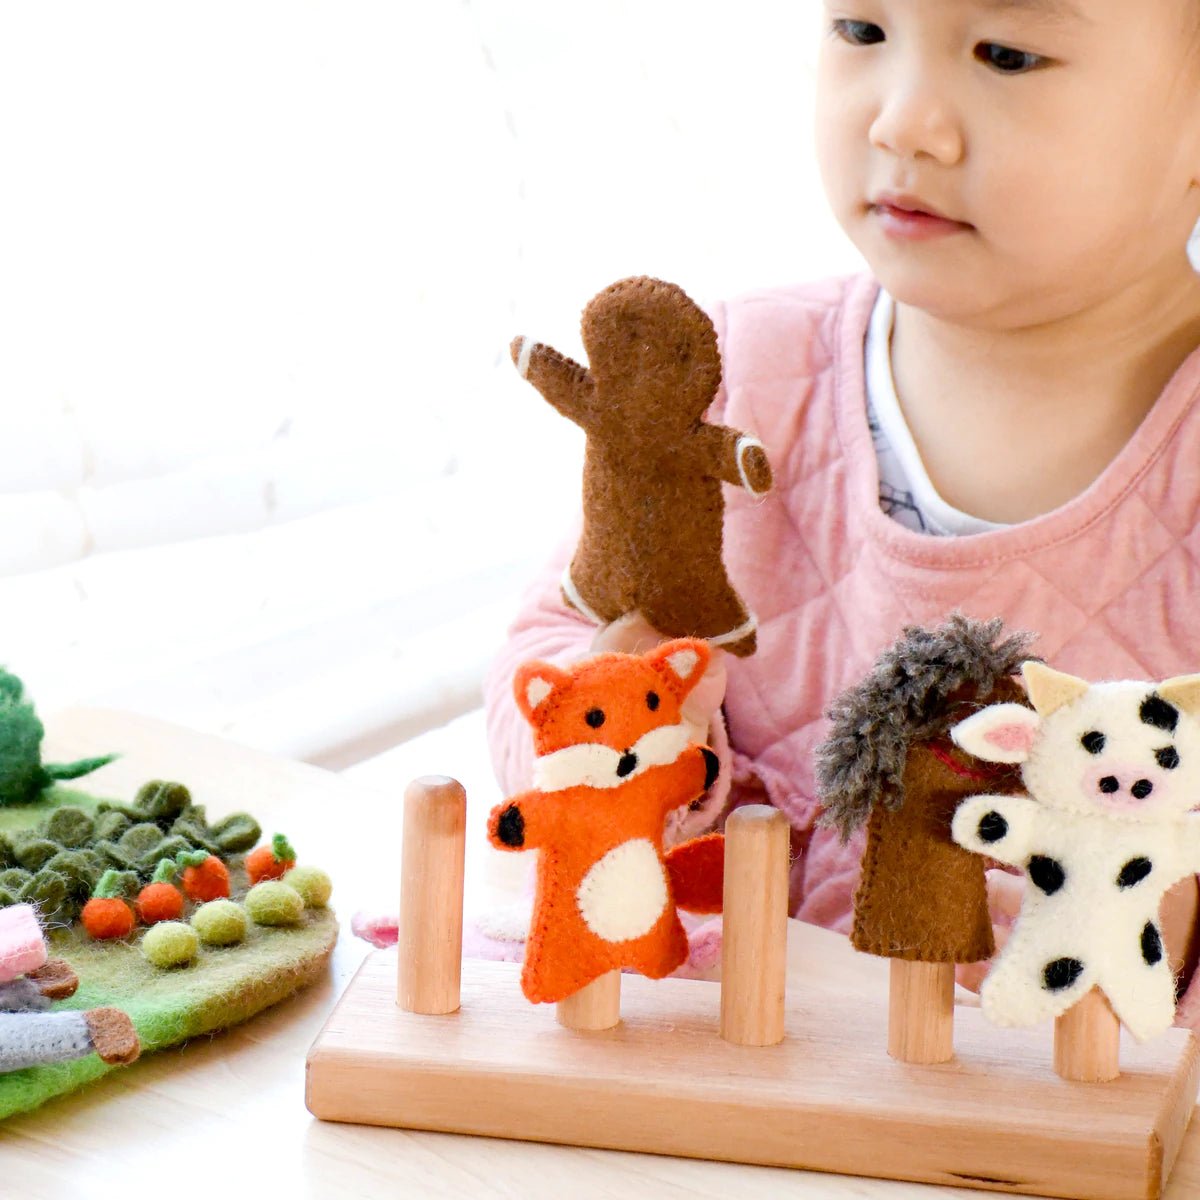 WOODEN FINGER PUPPET STAND (5 RODS) by TARA TREASURES - The Playful Collective